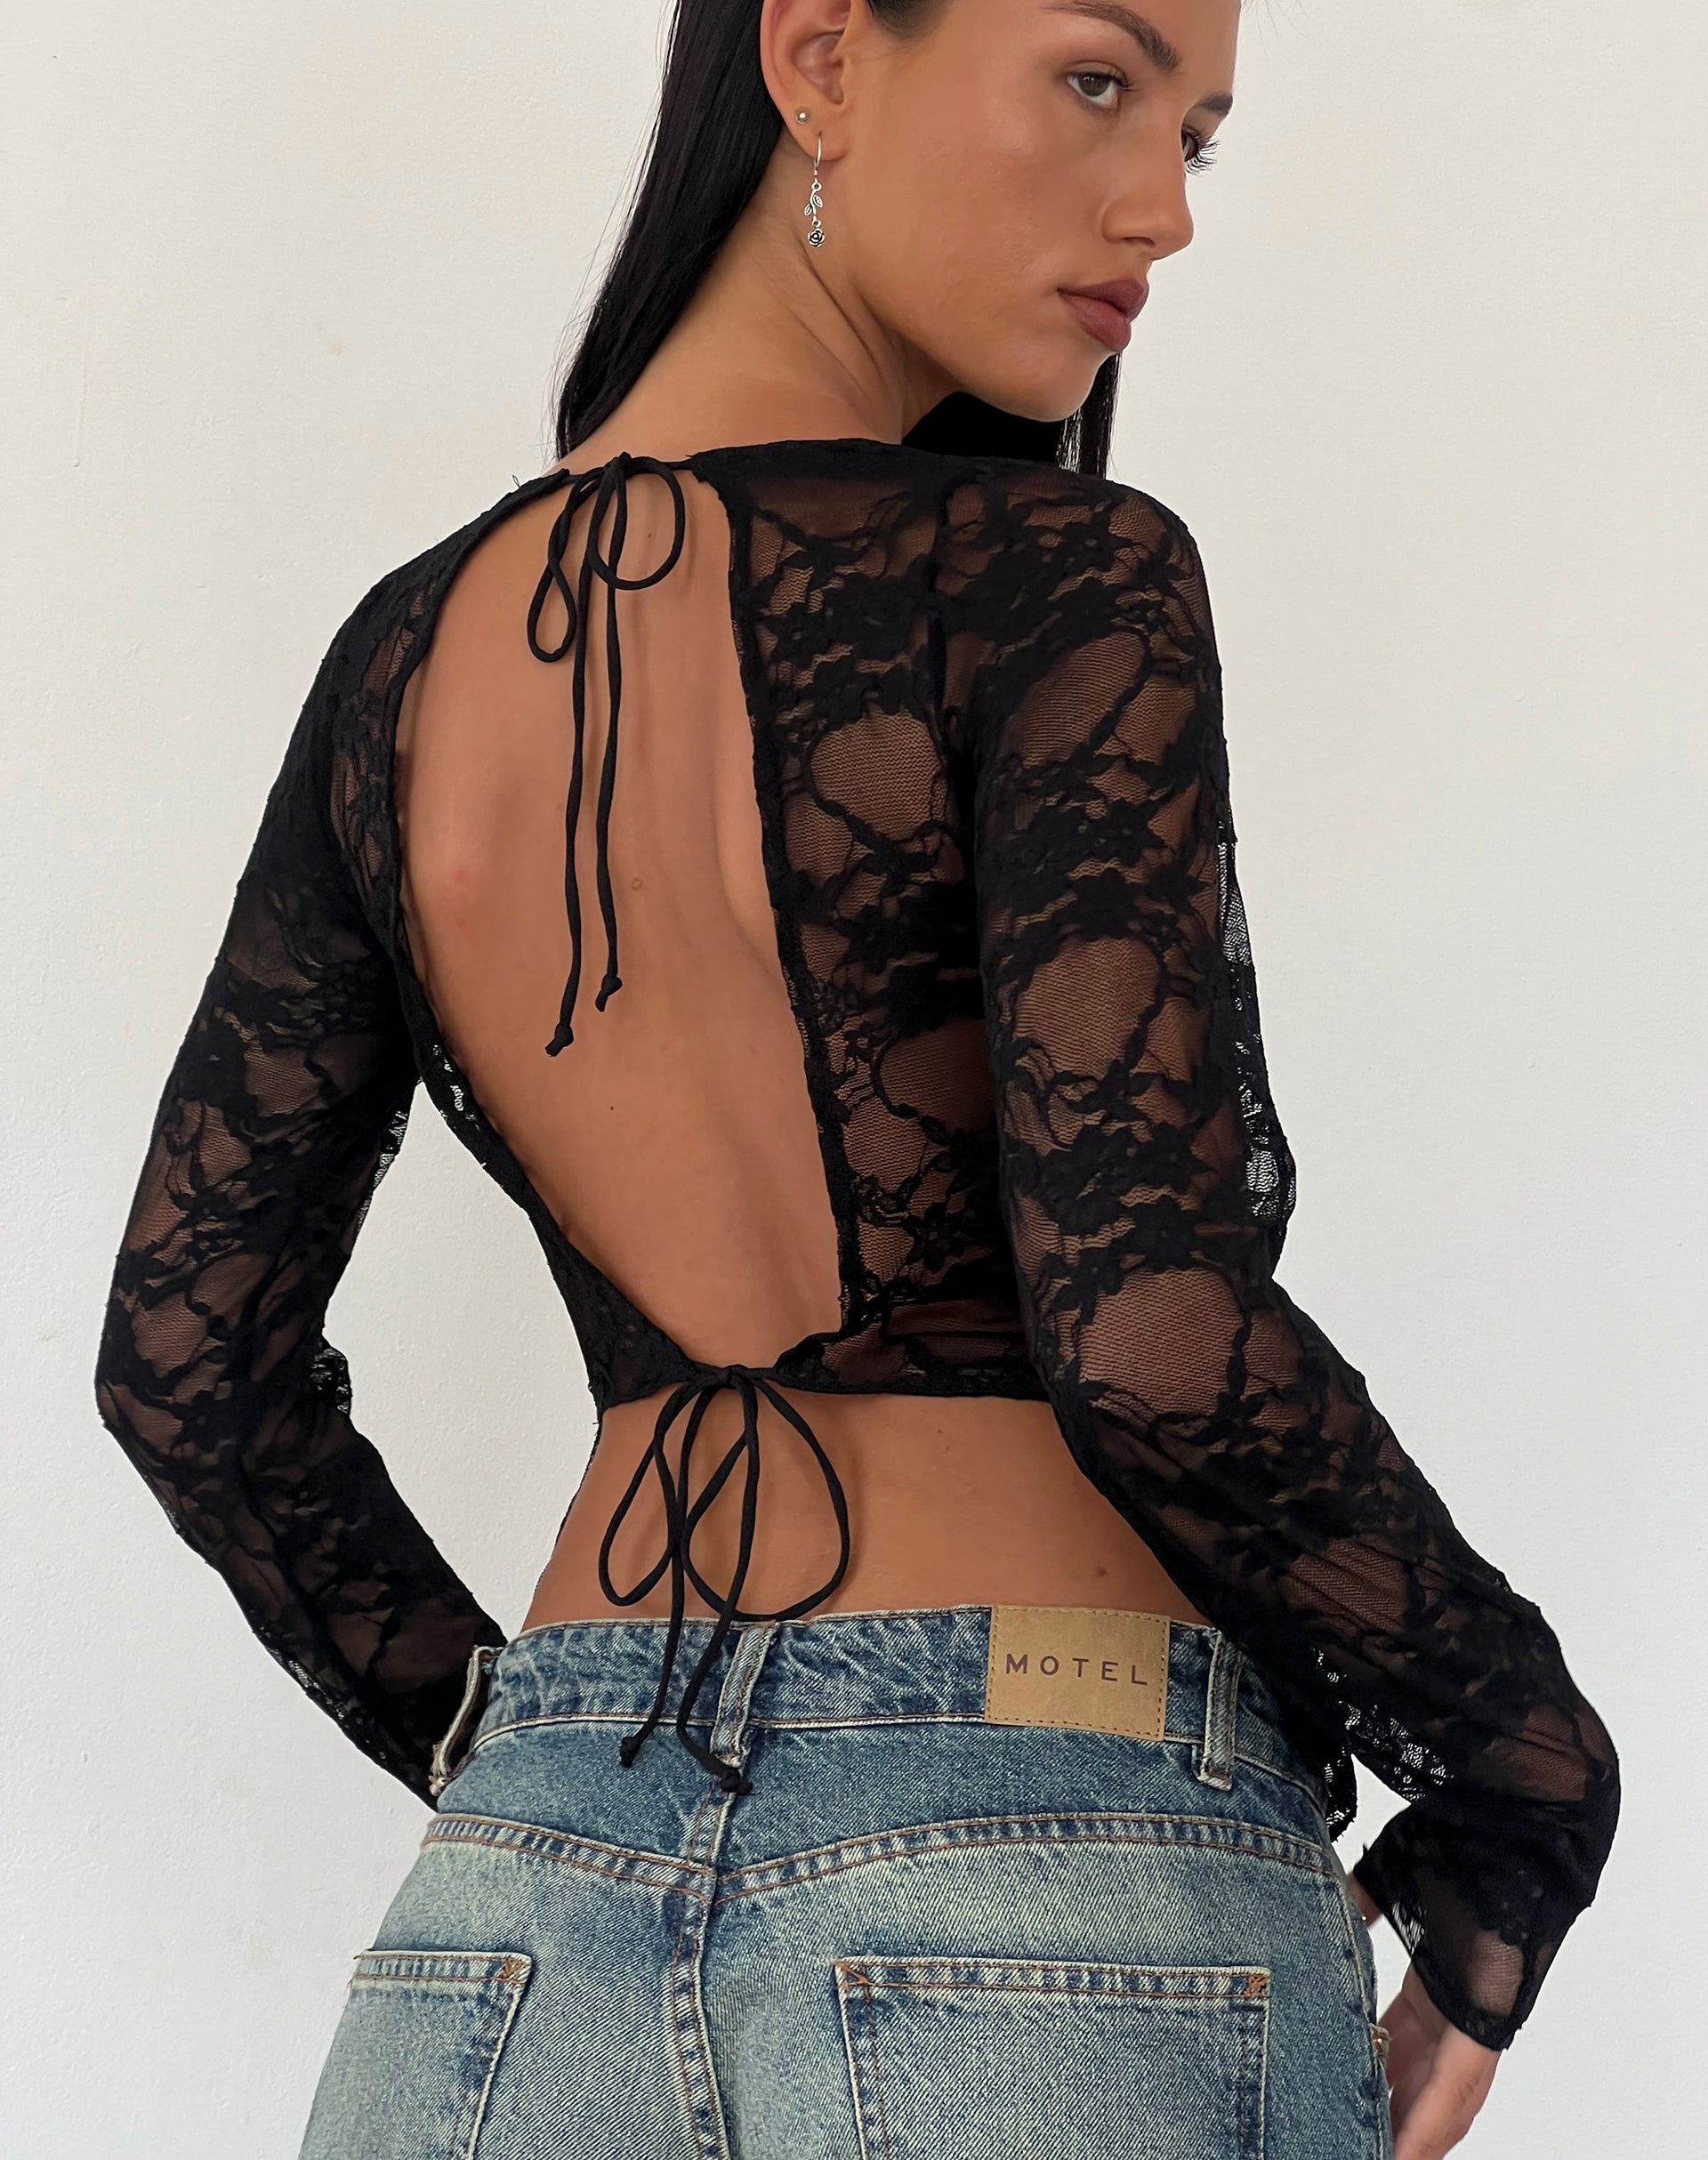 Image of Grizelda Backless Long Sleeve Top in Black Abstract Lace